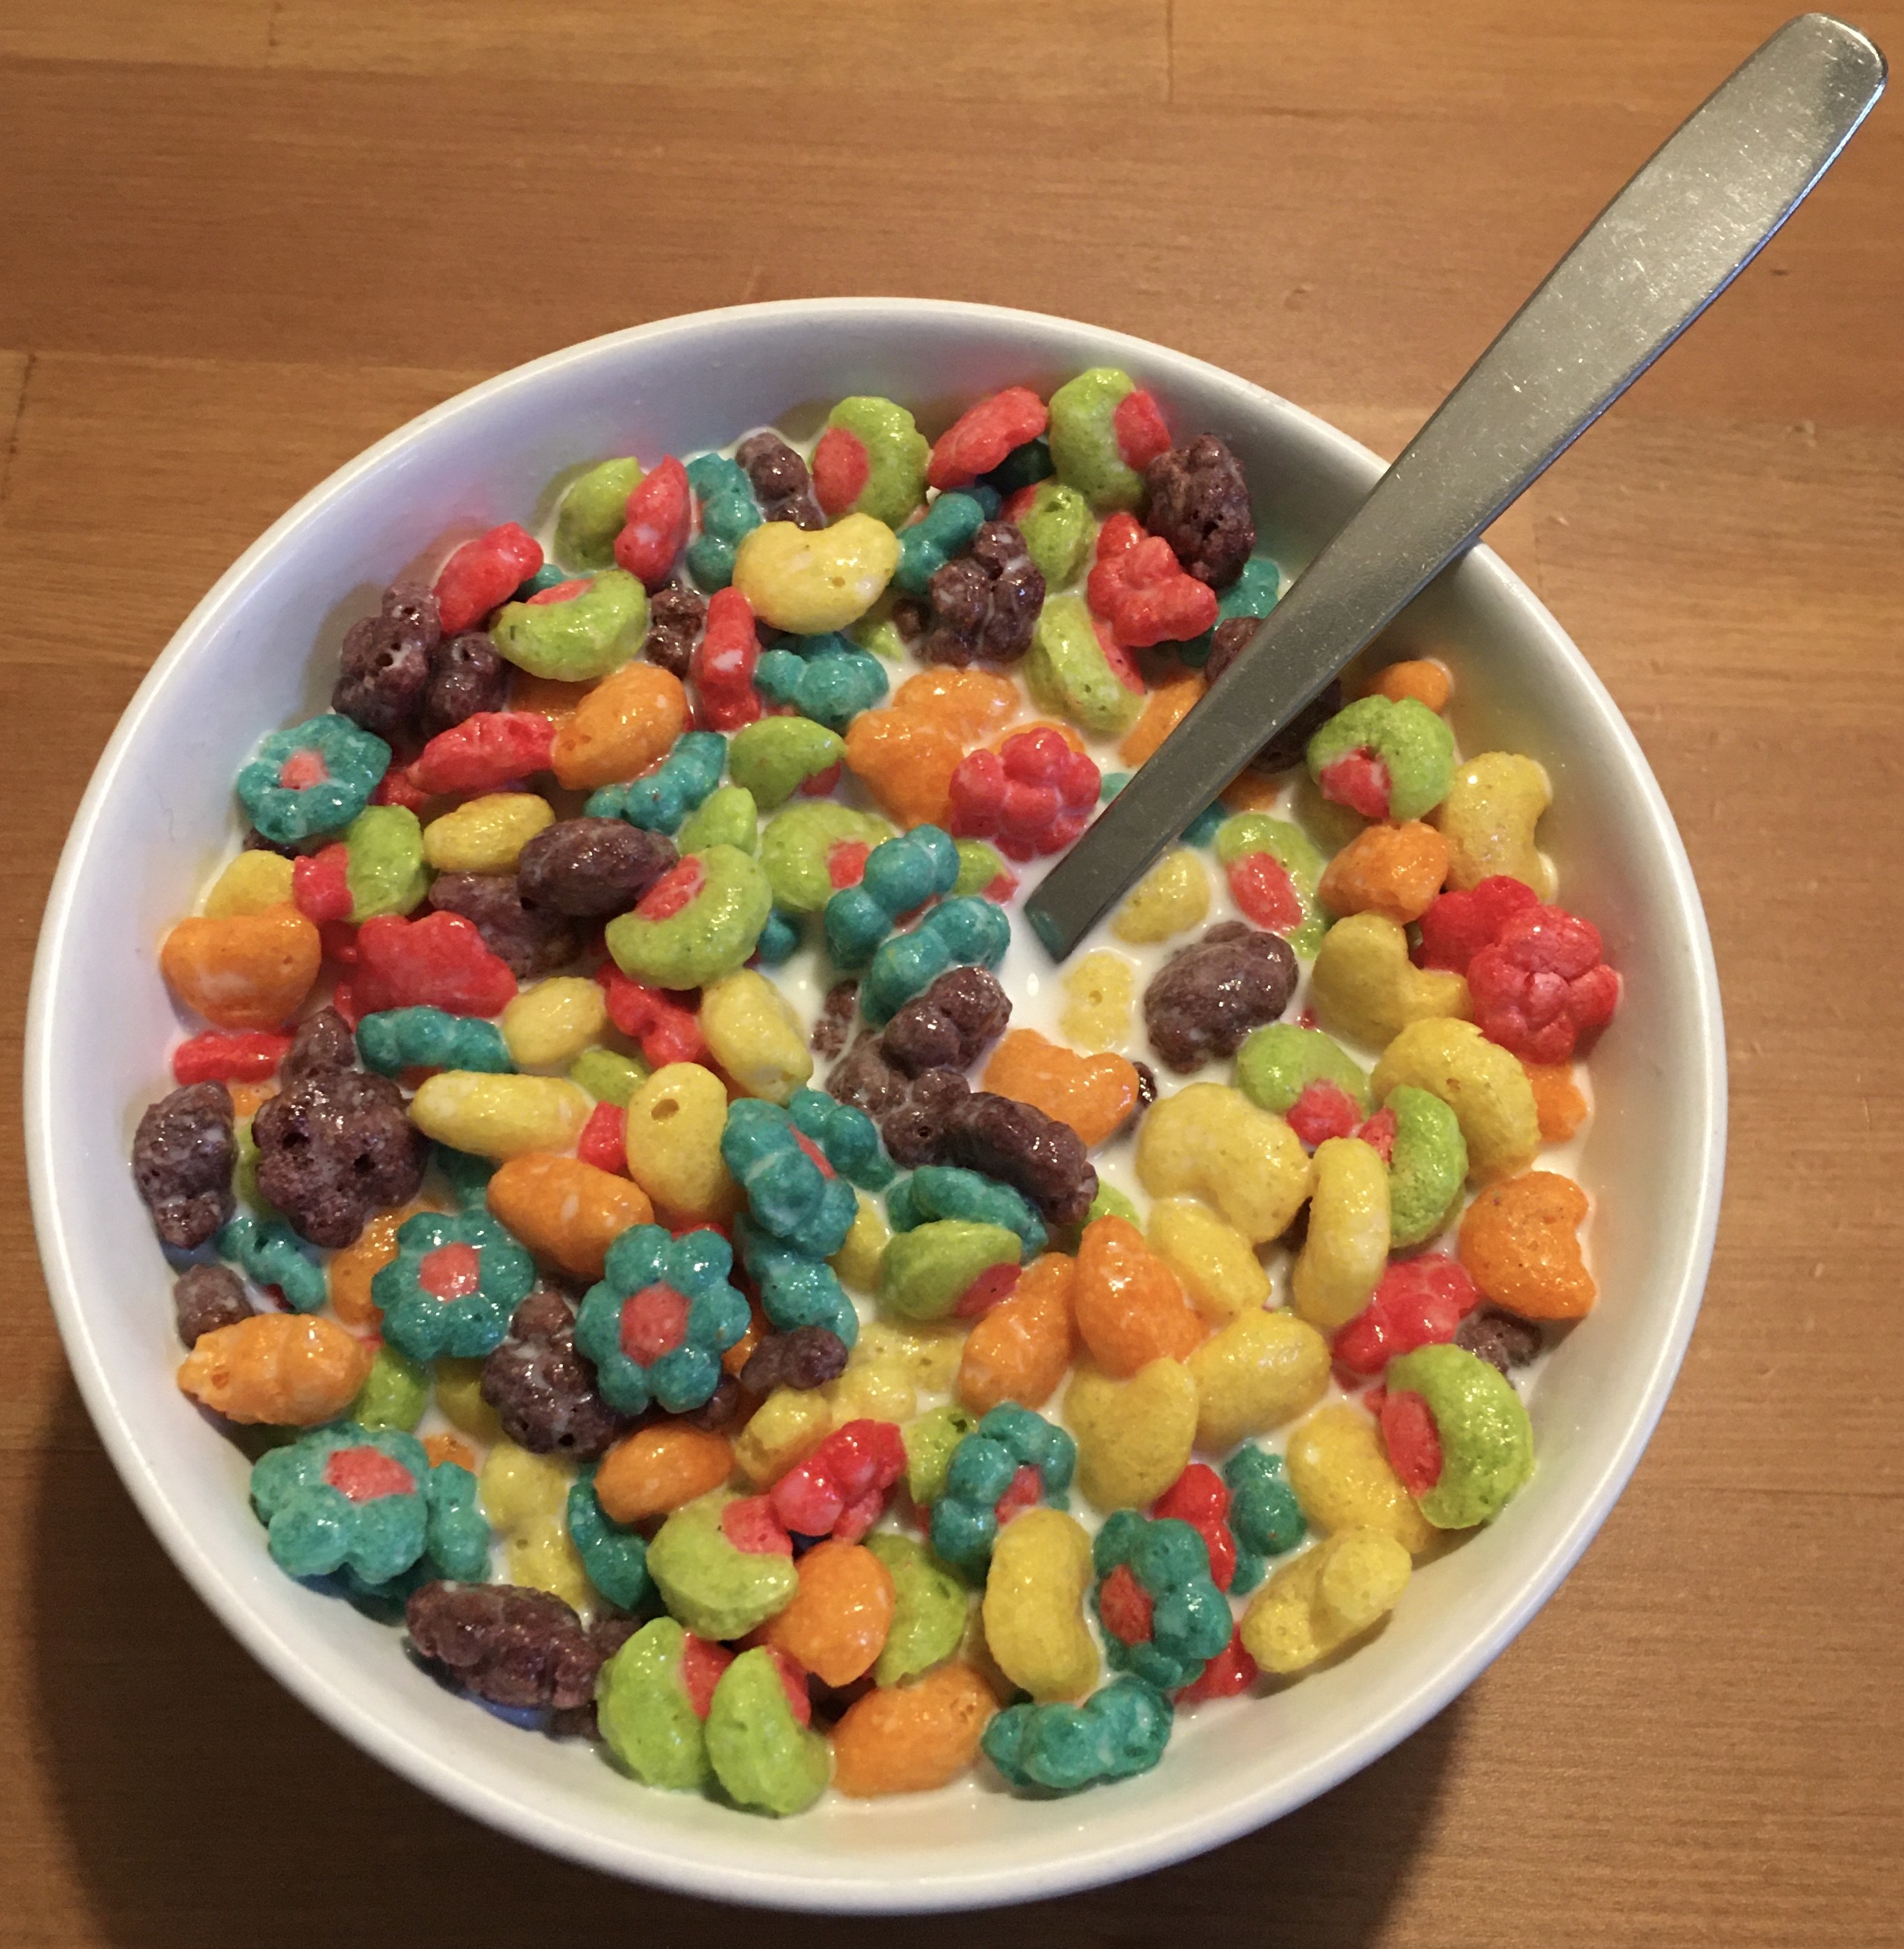 A bowl of Trix cereal.